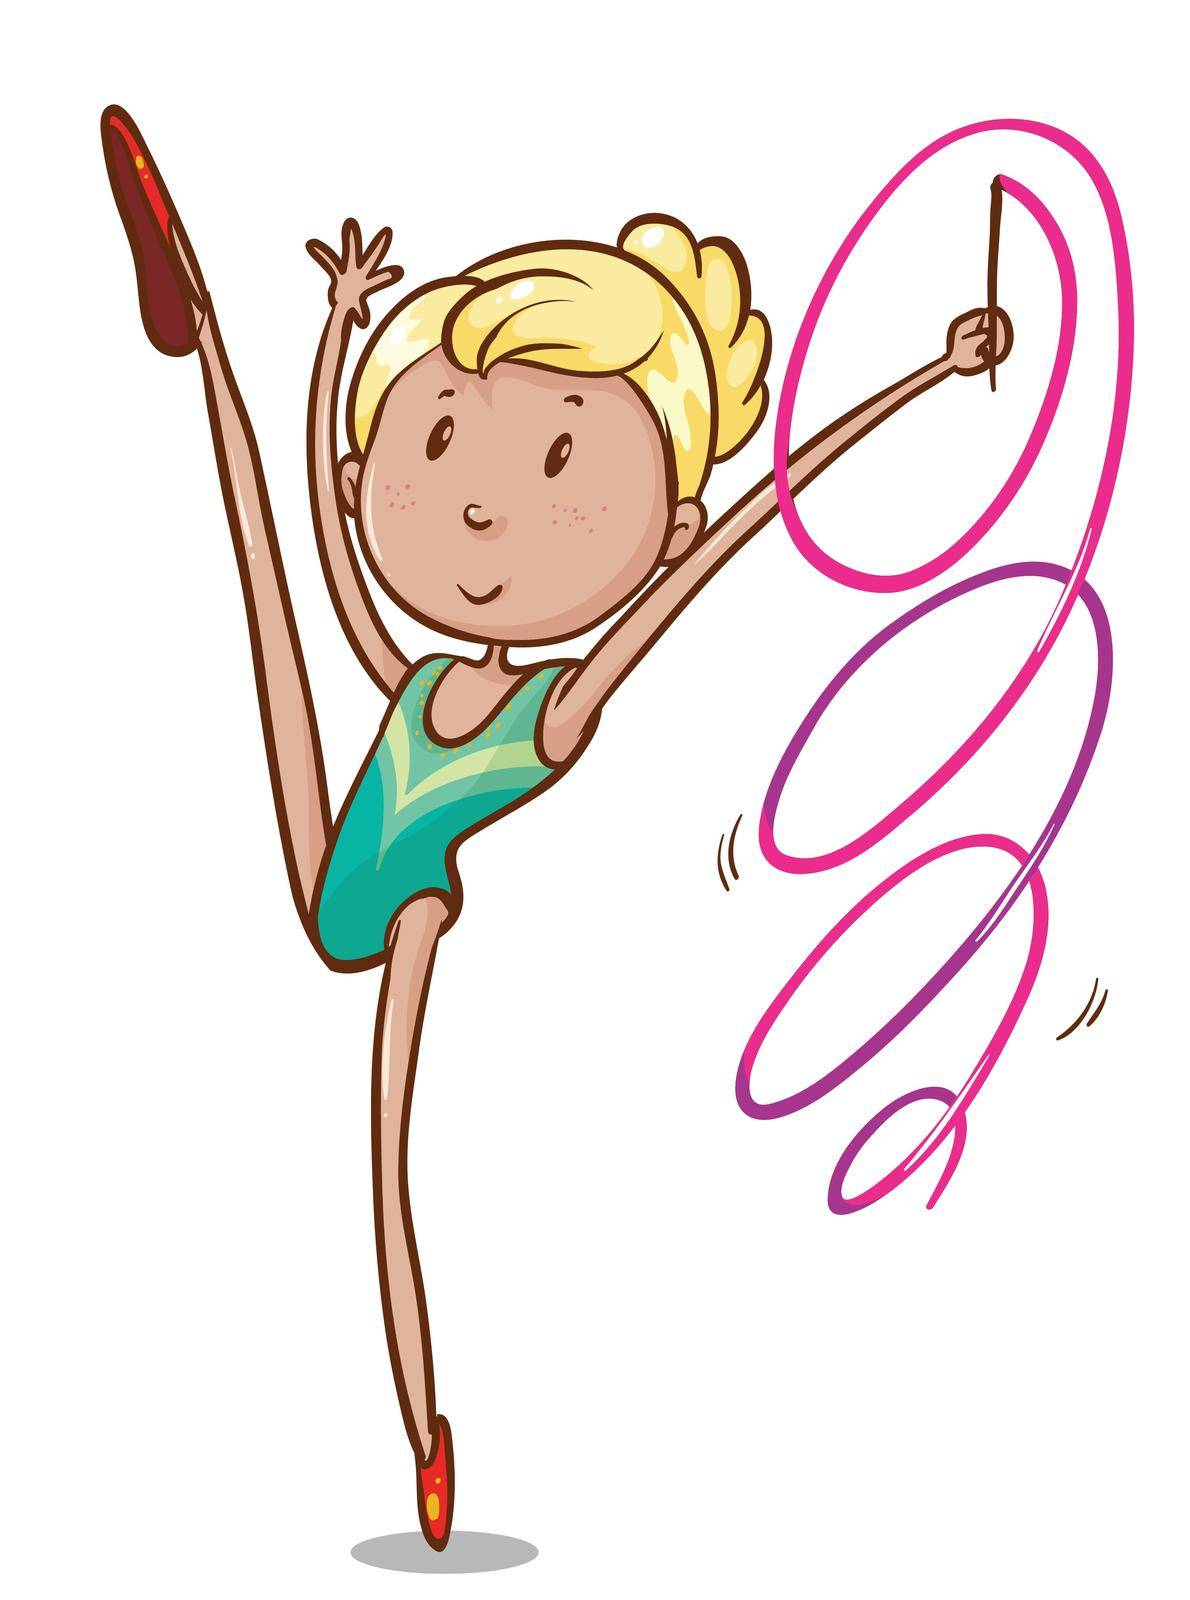 Illustration of a simple sketch of a gymnast on a white background